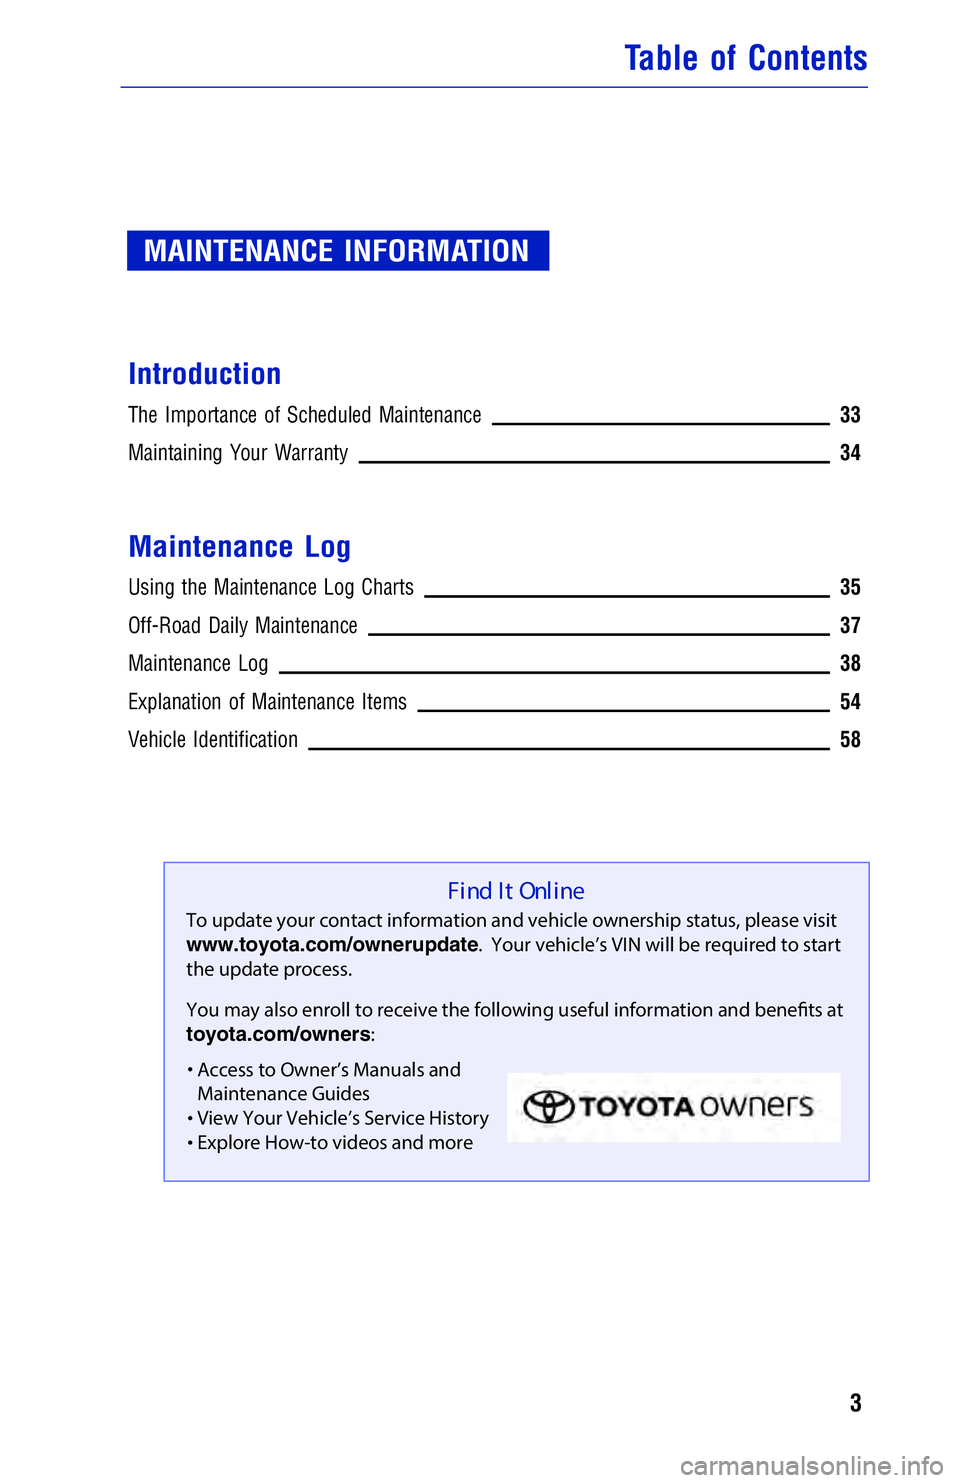 TOYOTA TACOMA 2018  Warranties & Maintenance Guides (in English) JOBNAME: 2878019-en-2018_Taco PAGE: 3 SESS: 4 OUTPUT: Mon Sep 25 11:49:43 2017
/InfoShareAuthorCODA/InfoShareAuthorCODA/TS_Warr_Maint/2878019-en-2018_T\
acoma.00505-18WMG-TAC_vX/TS_Warr_Maint_v1
MAINT